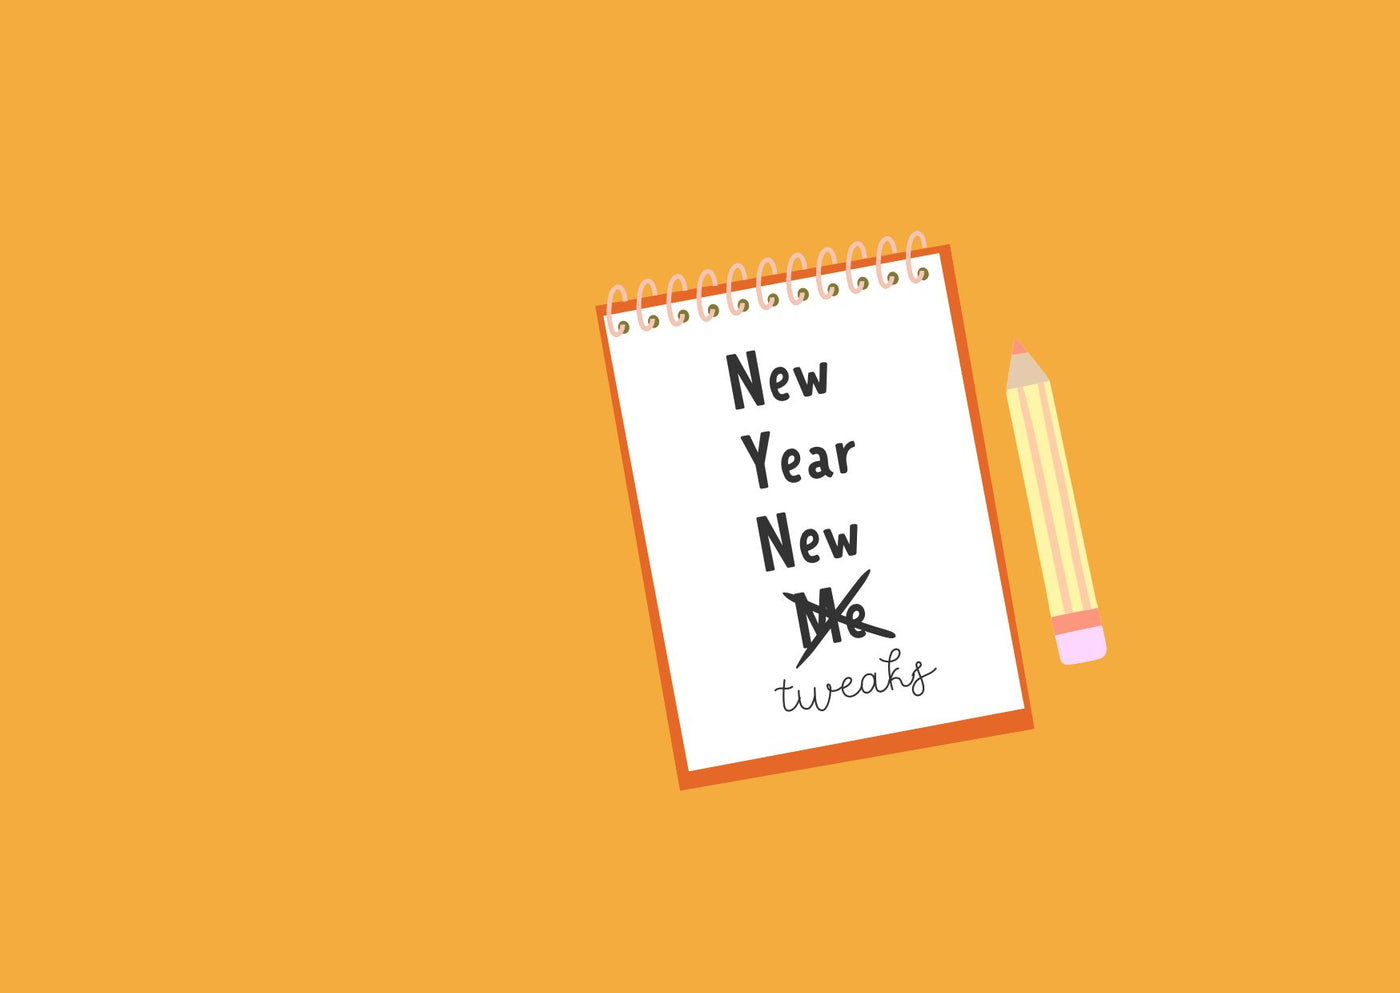 10 Eco Friendly New Years Resolutions You Can Keep